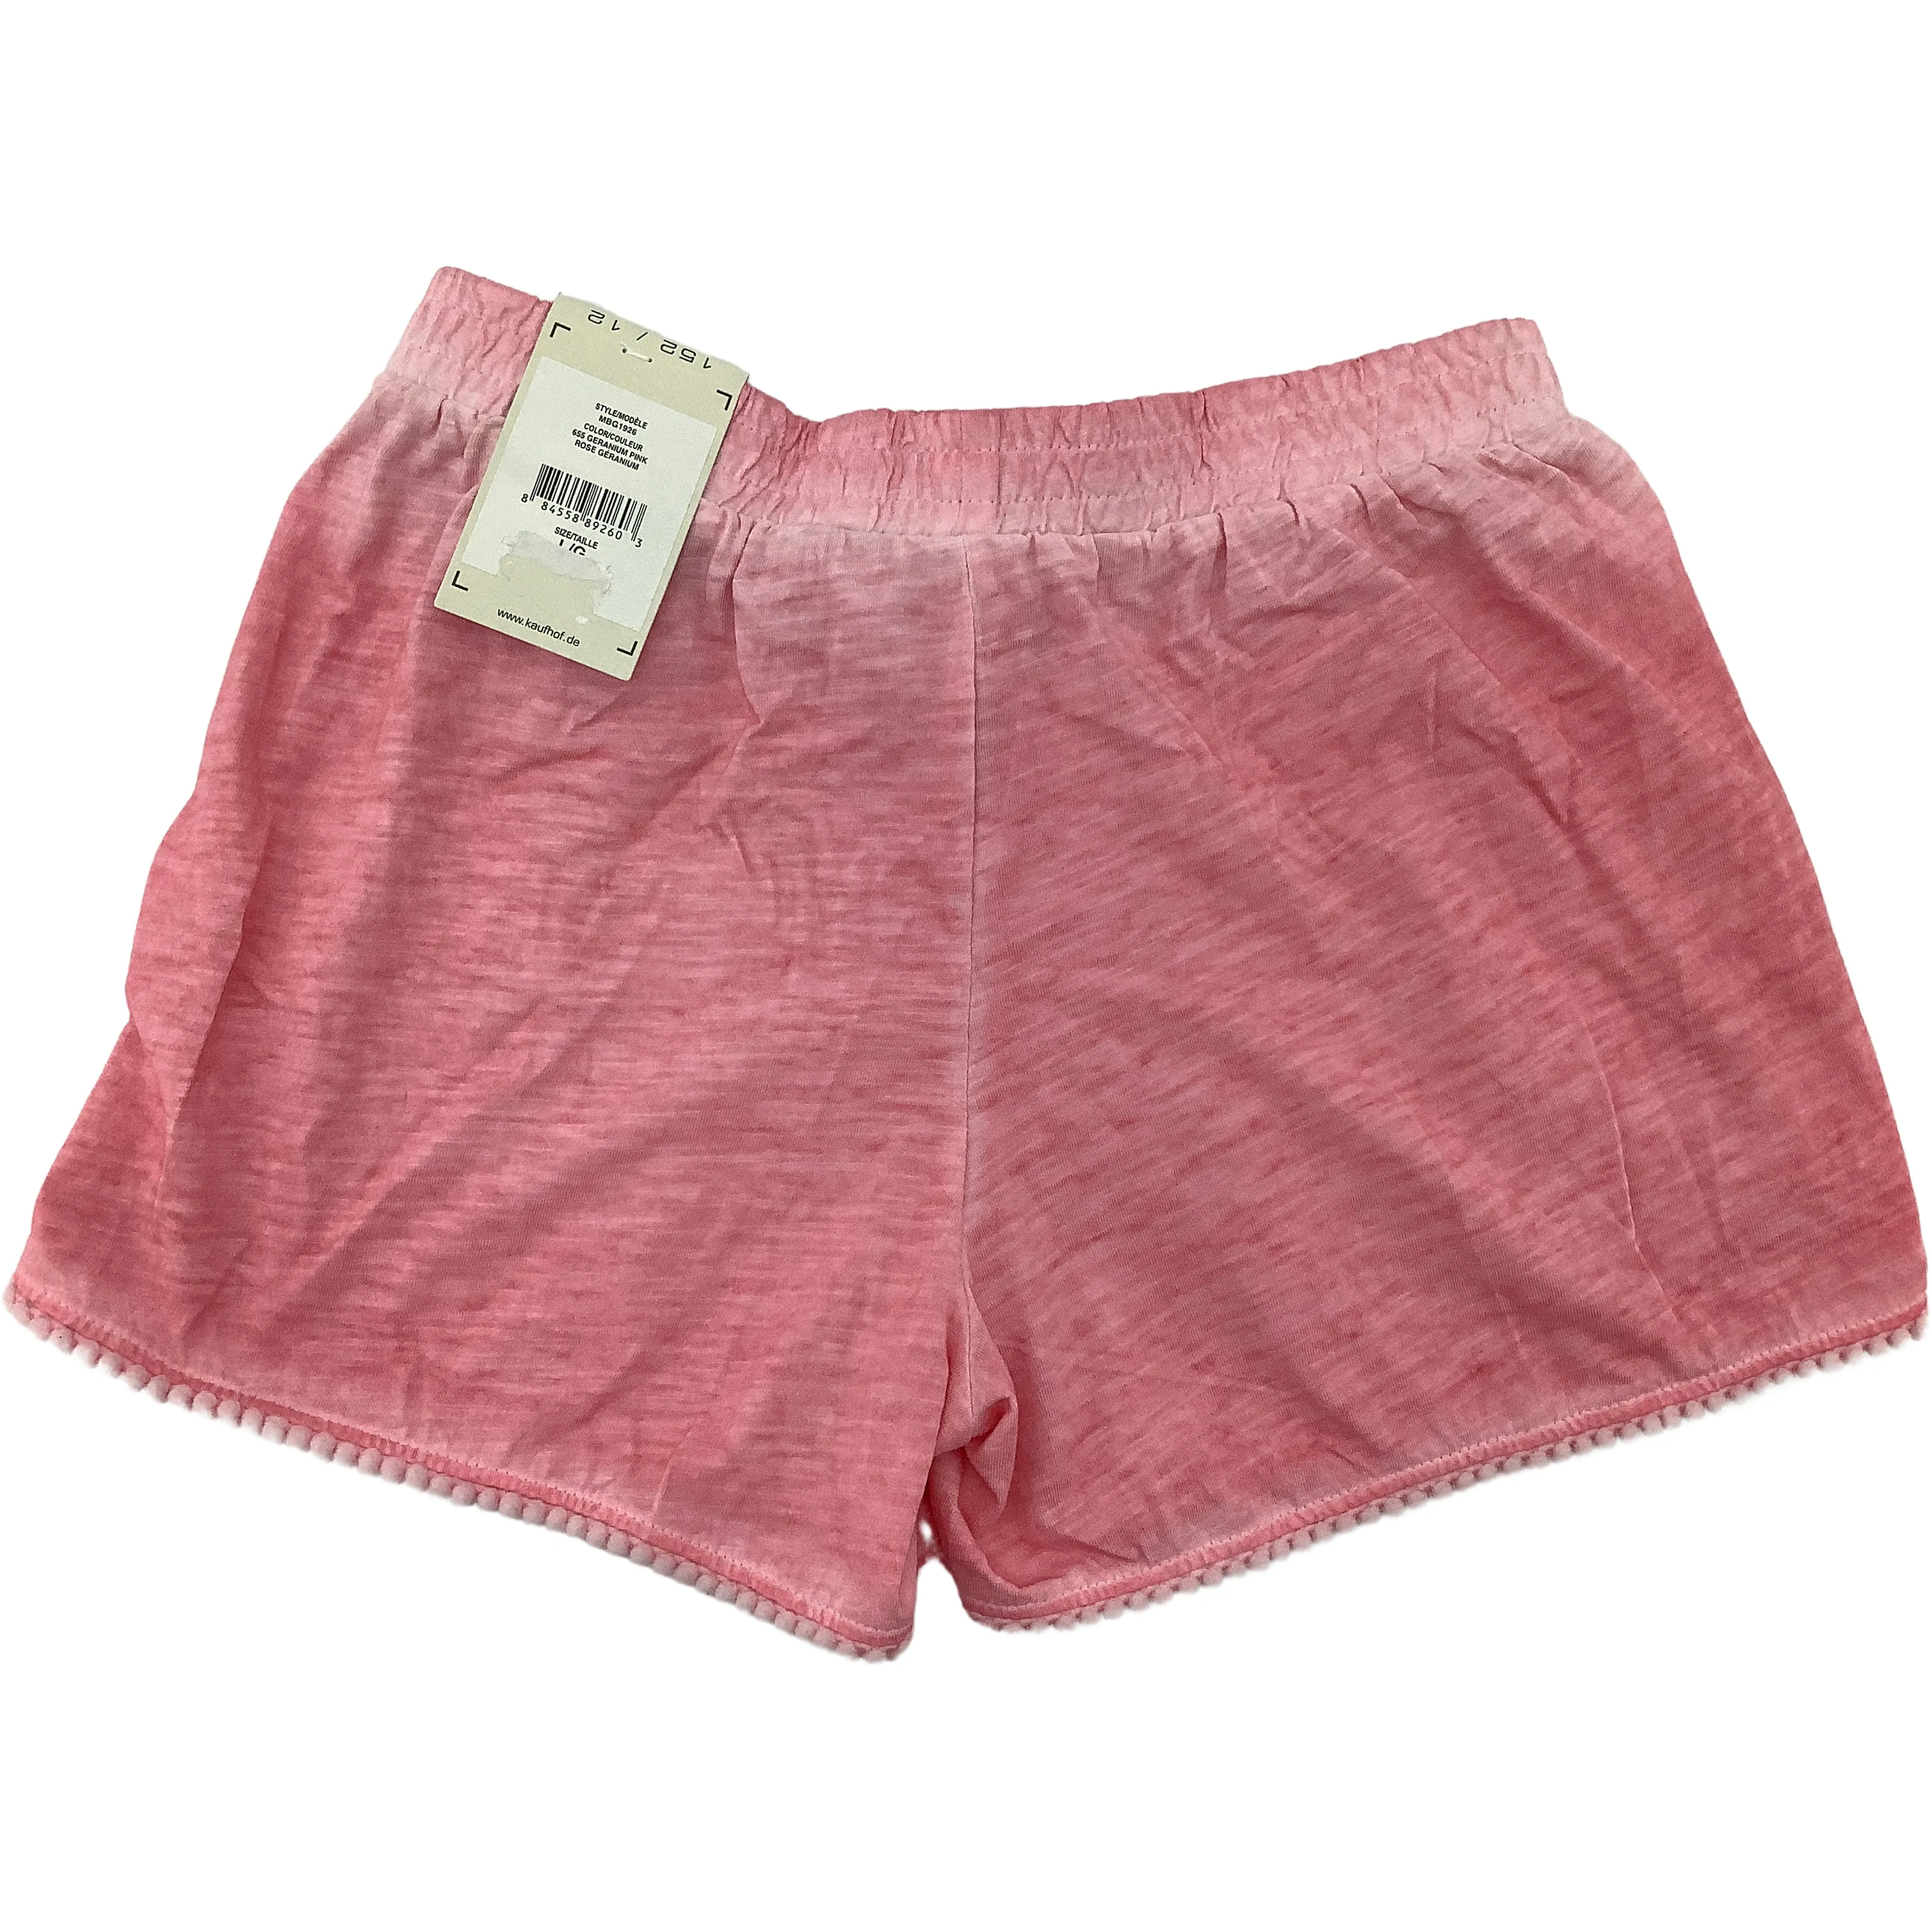 Manguun Girl's Shorts / Pink / Kid's Summer Clothes / Size L